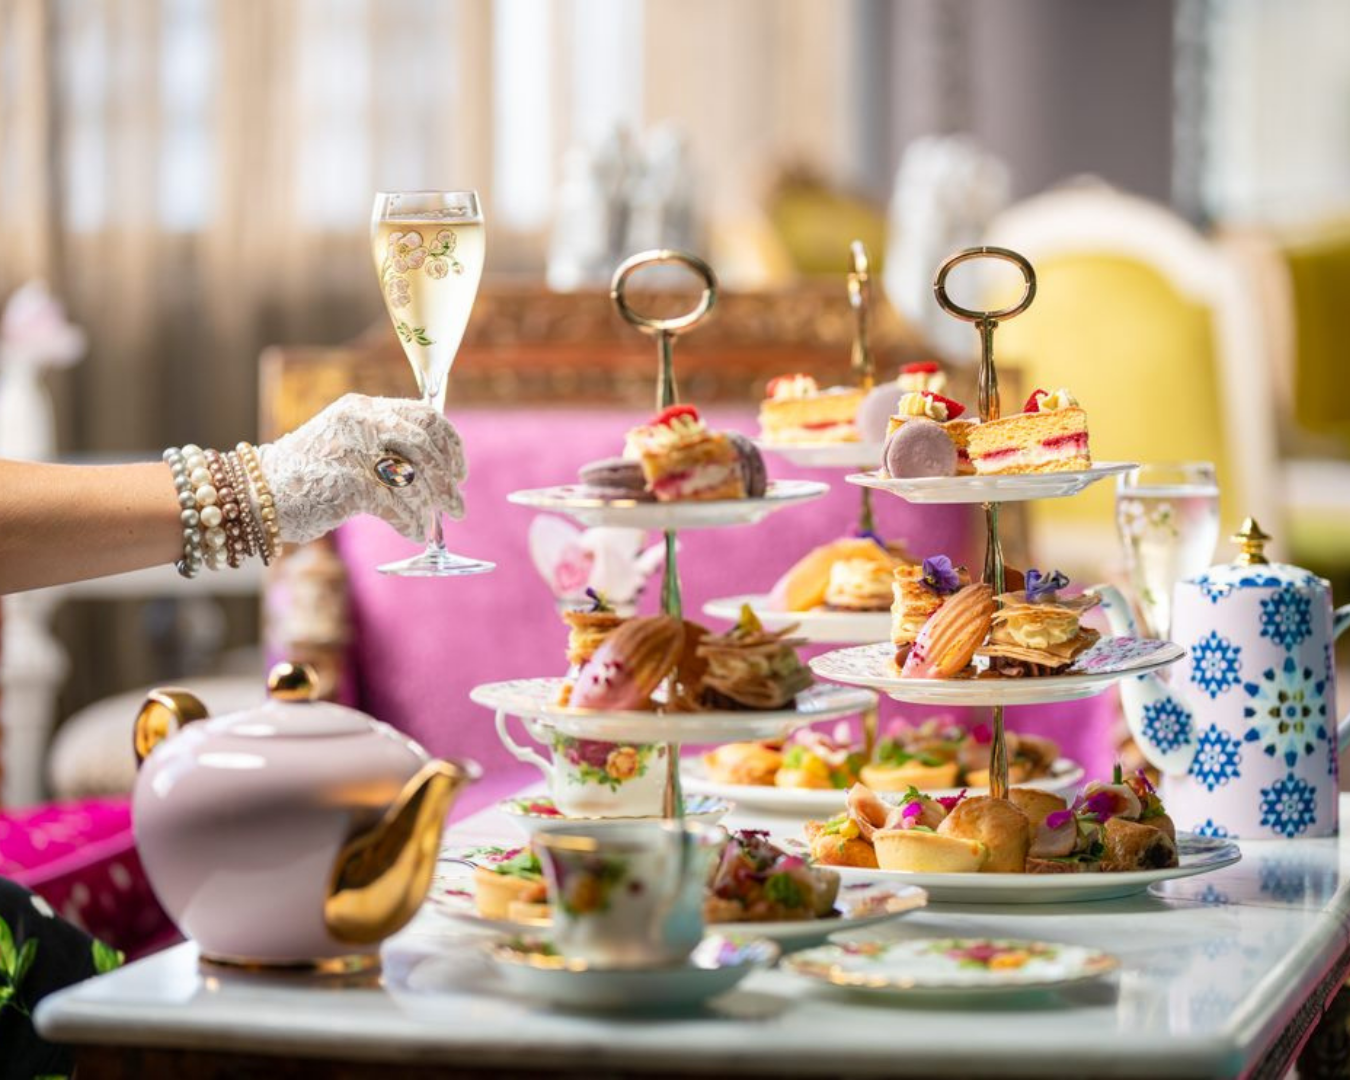 A lady holding a glass of bubbles next to a beautiful display of food and beverages at a high tea